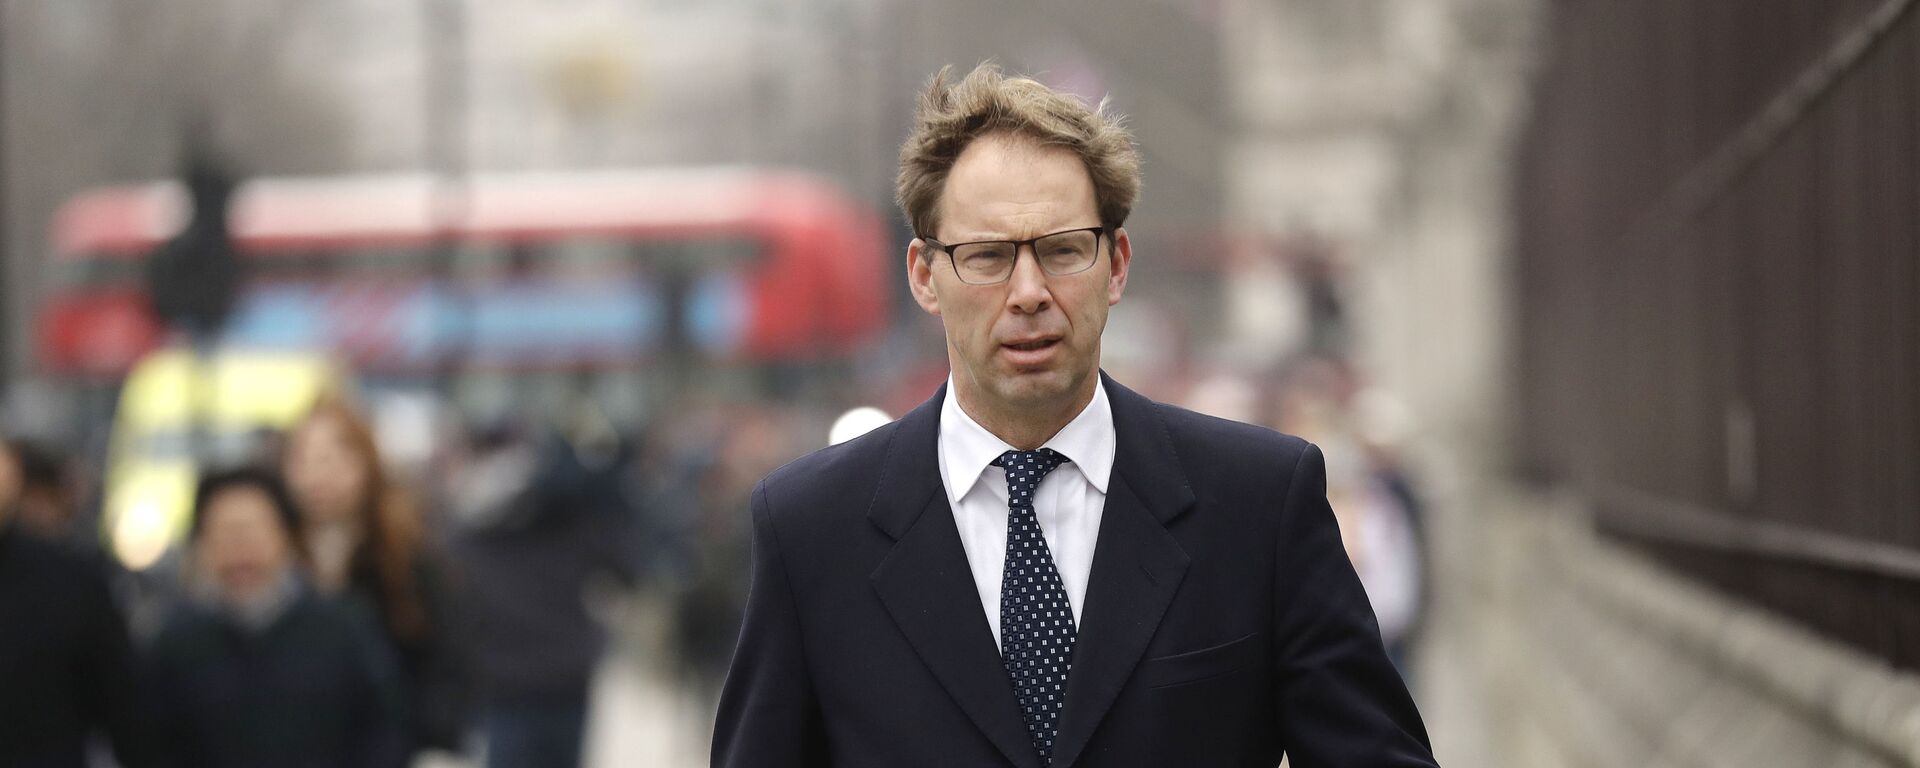 Conservative MP Tobias Ellwood arrives at the Houses of Parliament in London, Friday March 24, 2017 - Sputnik International, 1920, 14.04.2022